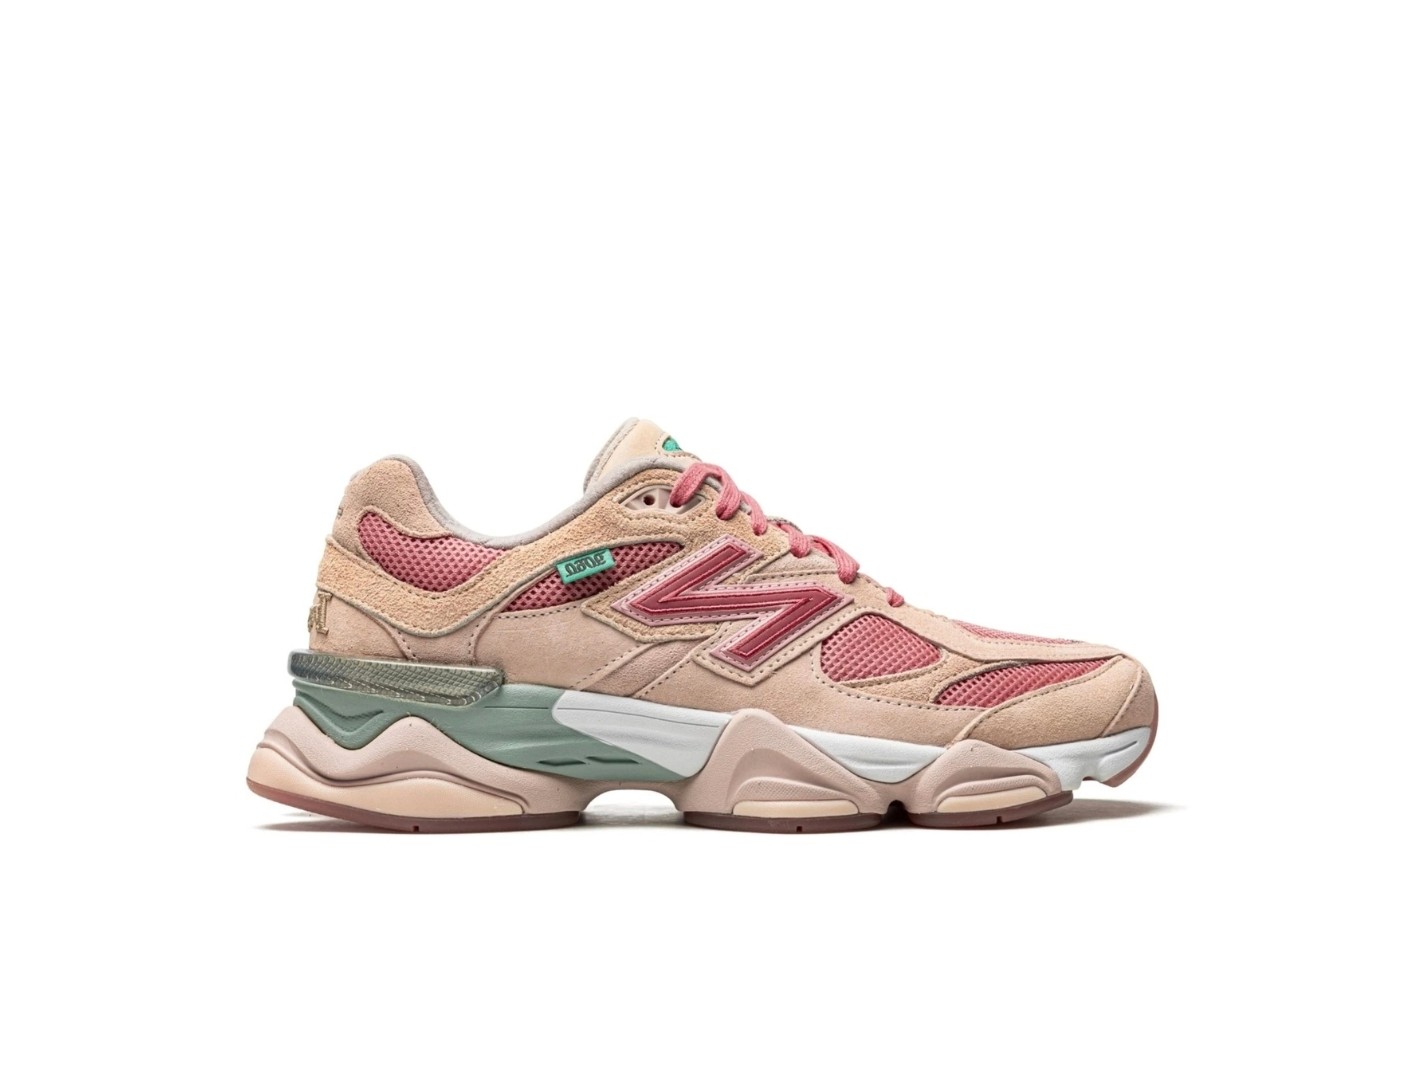 NEW BALANCE 9060 "Joe Fresh Goods - Inside Voices Penny Cookie Pink"